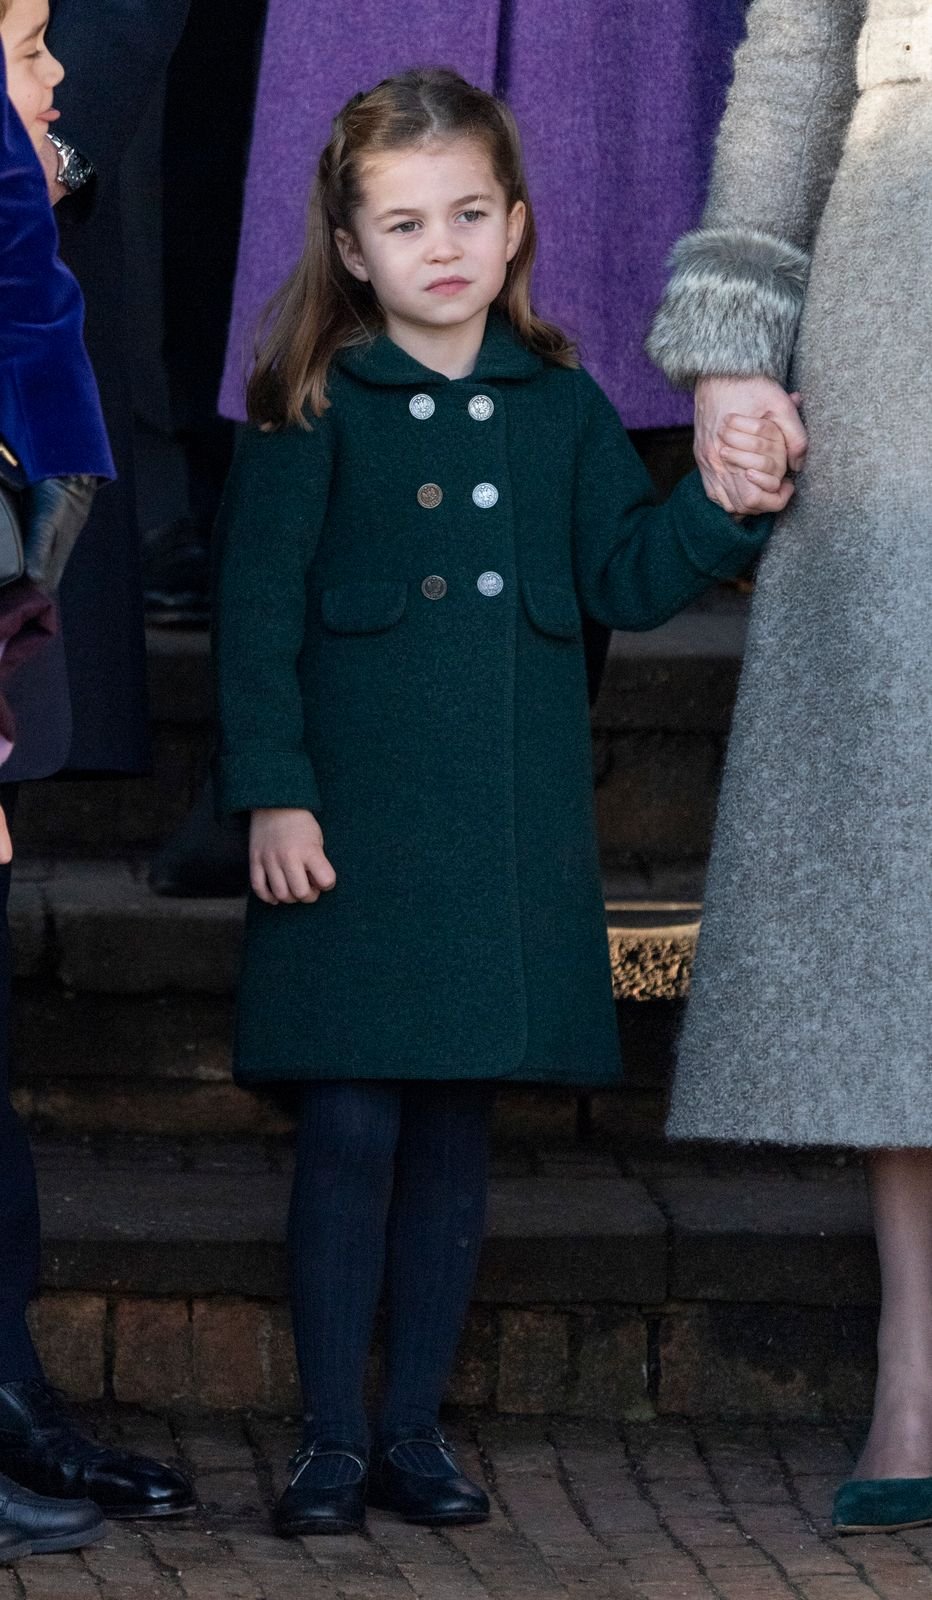 Princess Charlotte at the Christmas Day Church service at Church of St Mary Magdalene on December 25, 2019, in King's Lynn, United Kingdom | Photo: UK Press Pool/UK Press/Getty Images